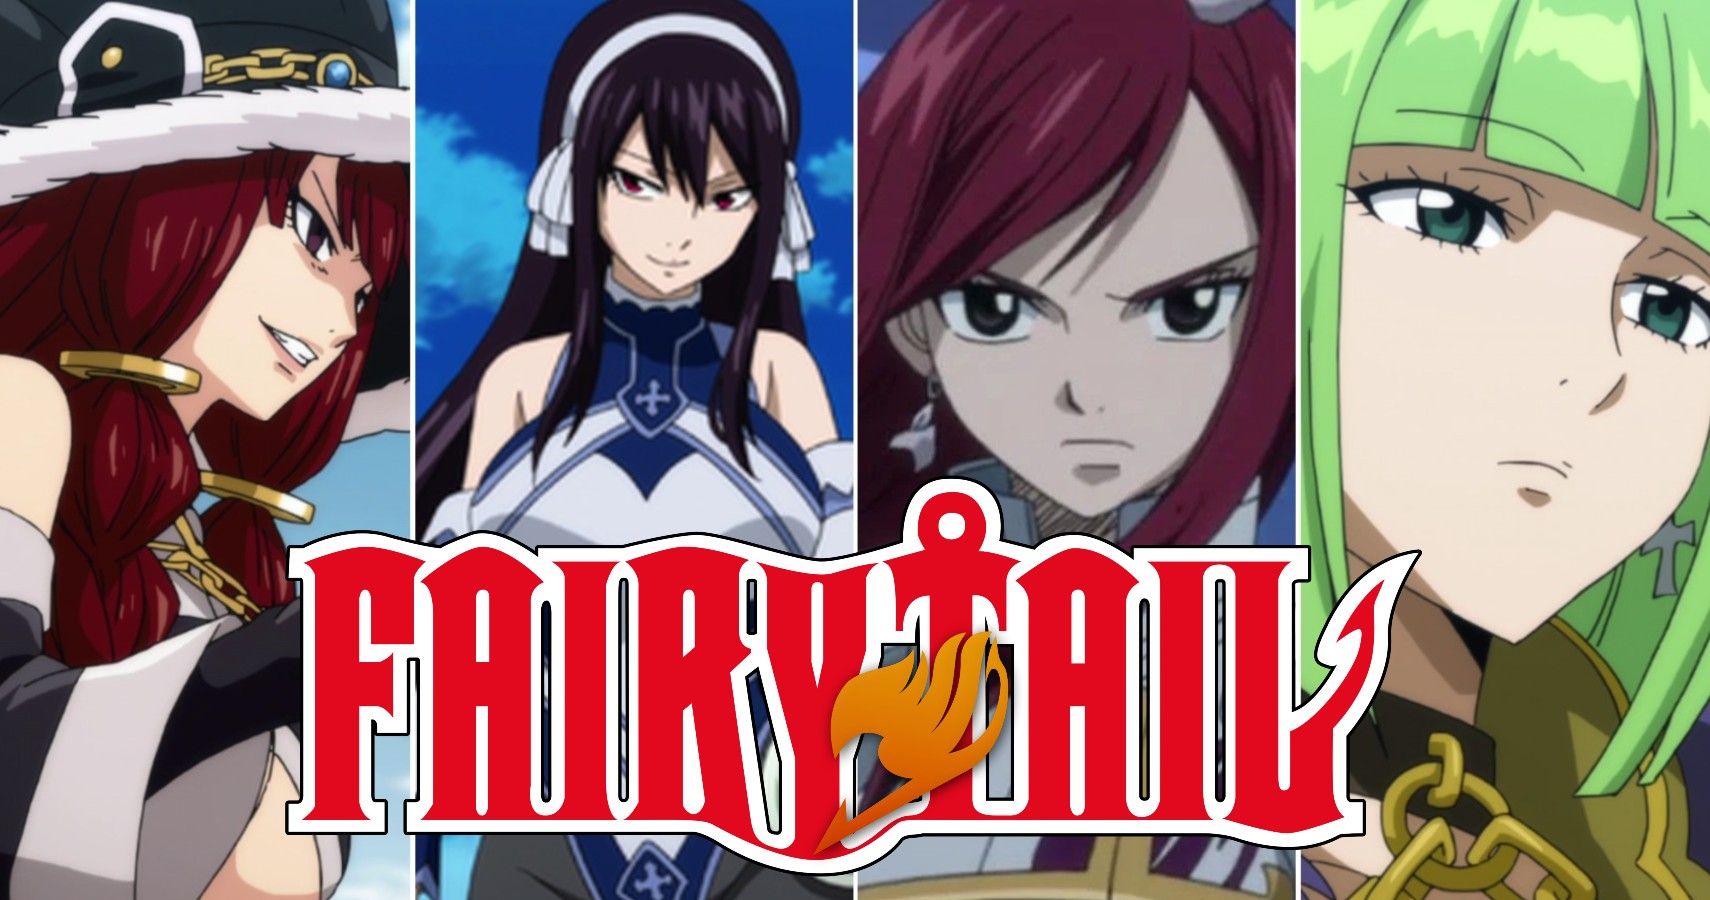 Did One Piece or Fairy Tail Have Better Female Shonen Characters?